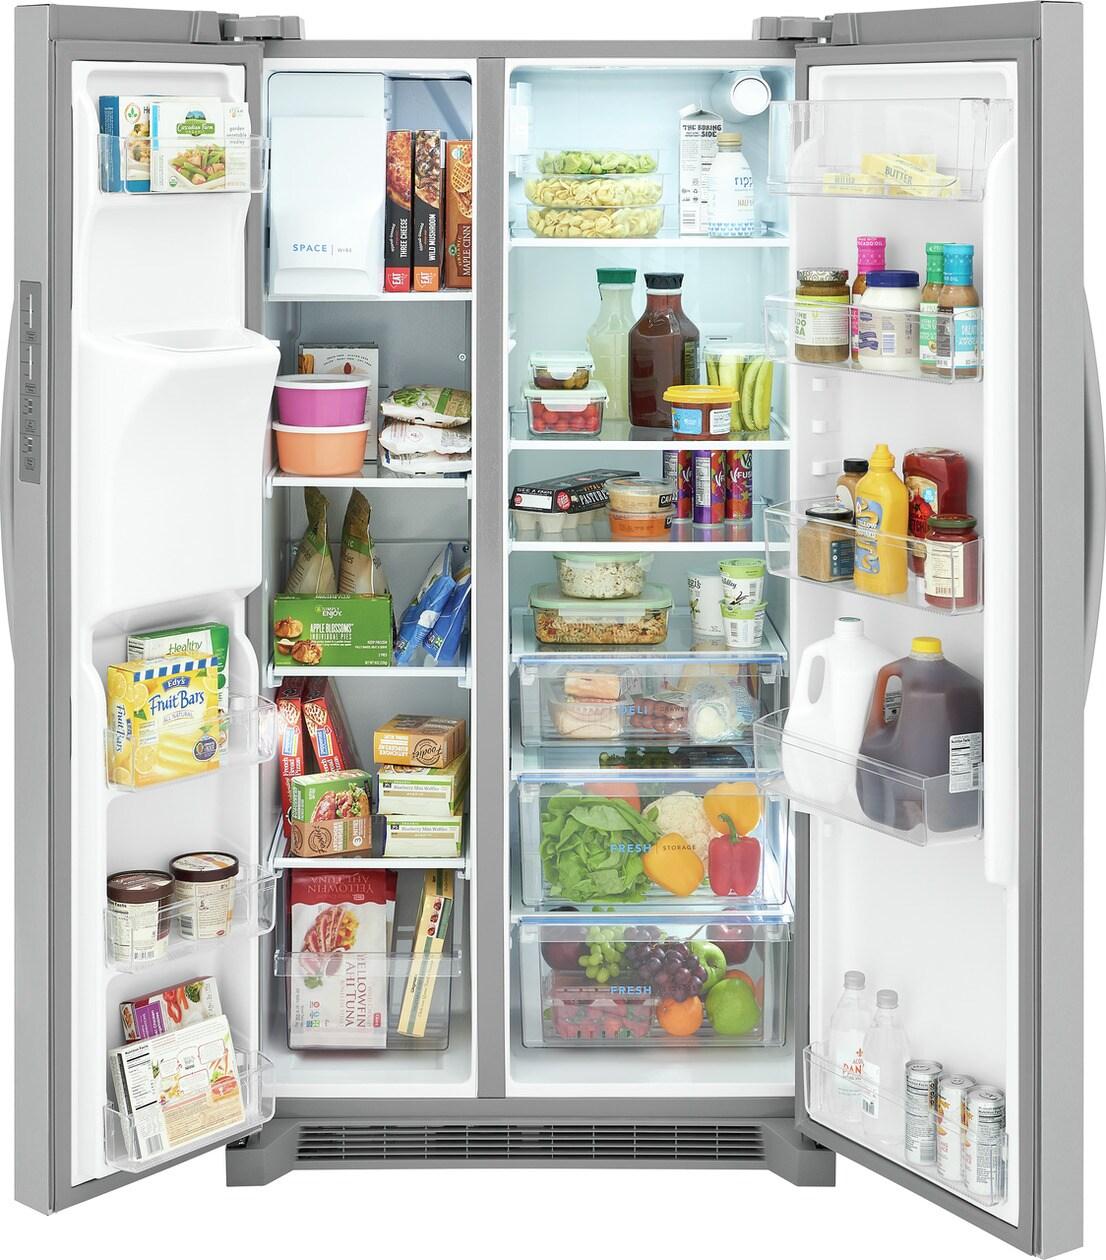 Frigidaire Frsc2333a 36" Wide 22.30 Cu. Ft. Side By Side Refrigerator - Stainless Steel - image 3 of 5